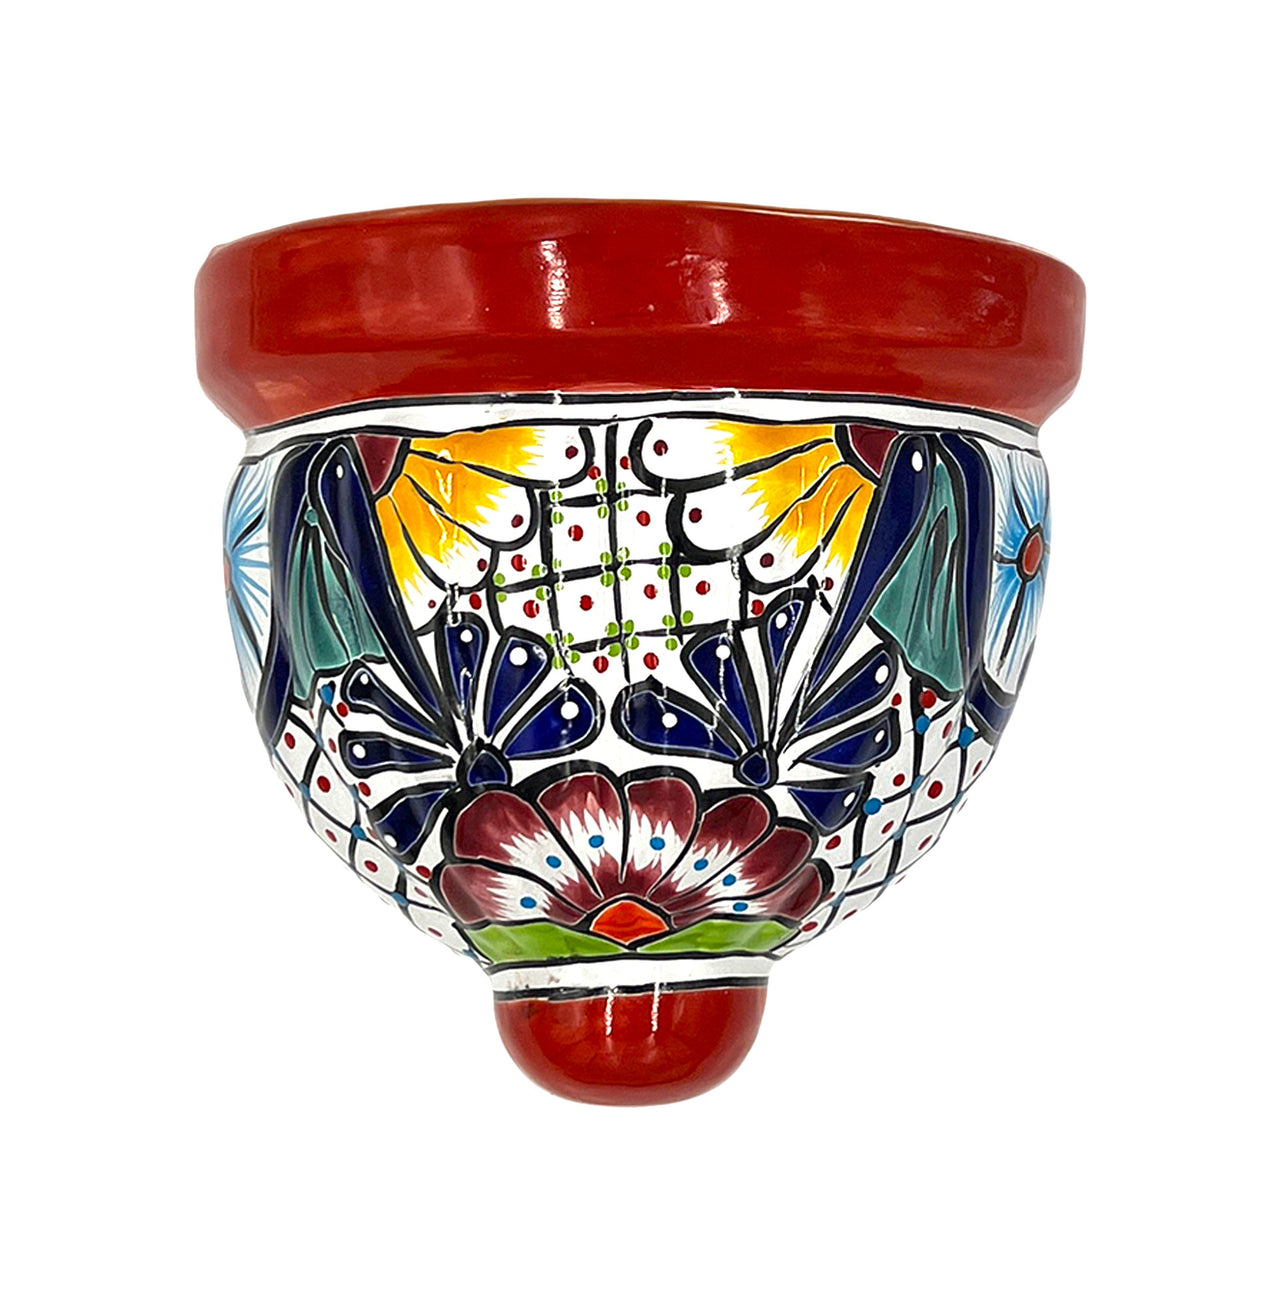 Mexican Talavera Wall Planter Pot - Hand Painted Wall Planter Red Trim